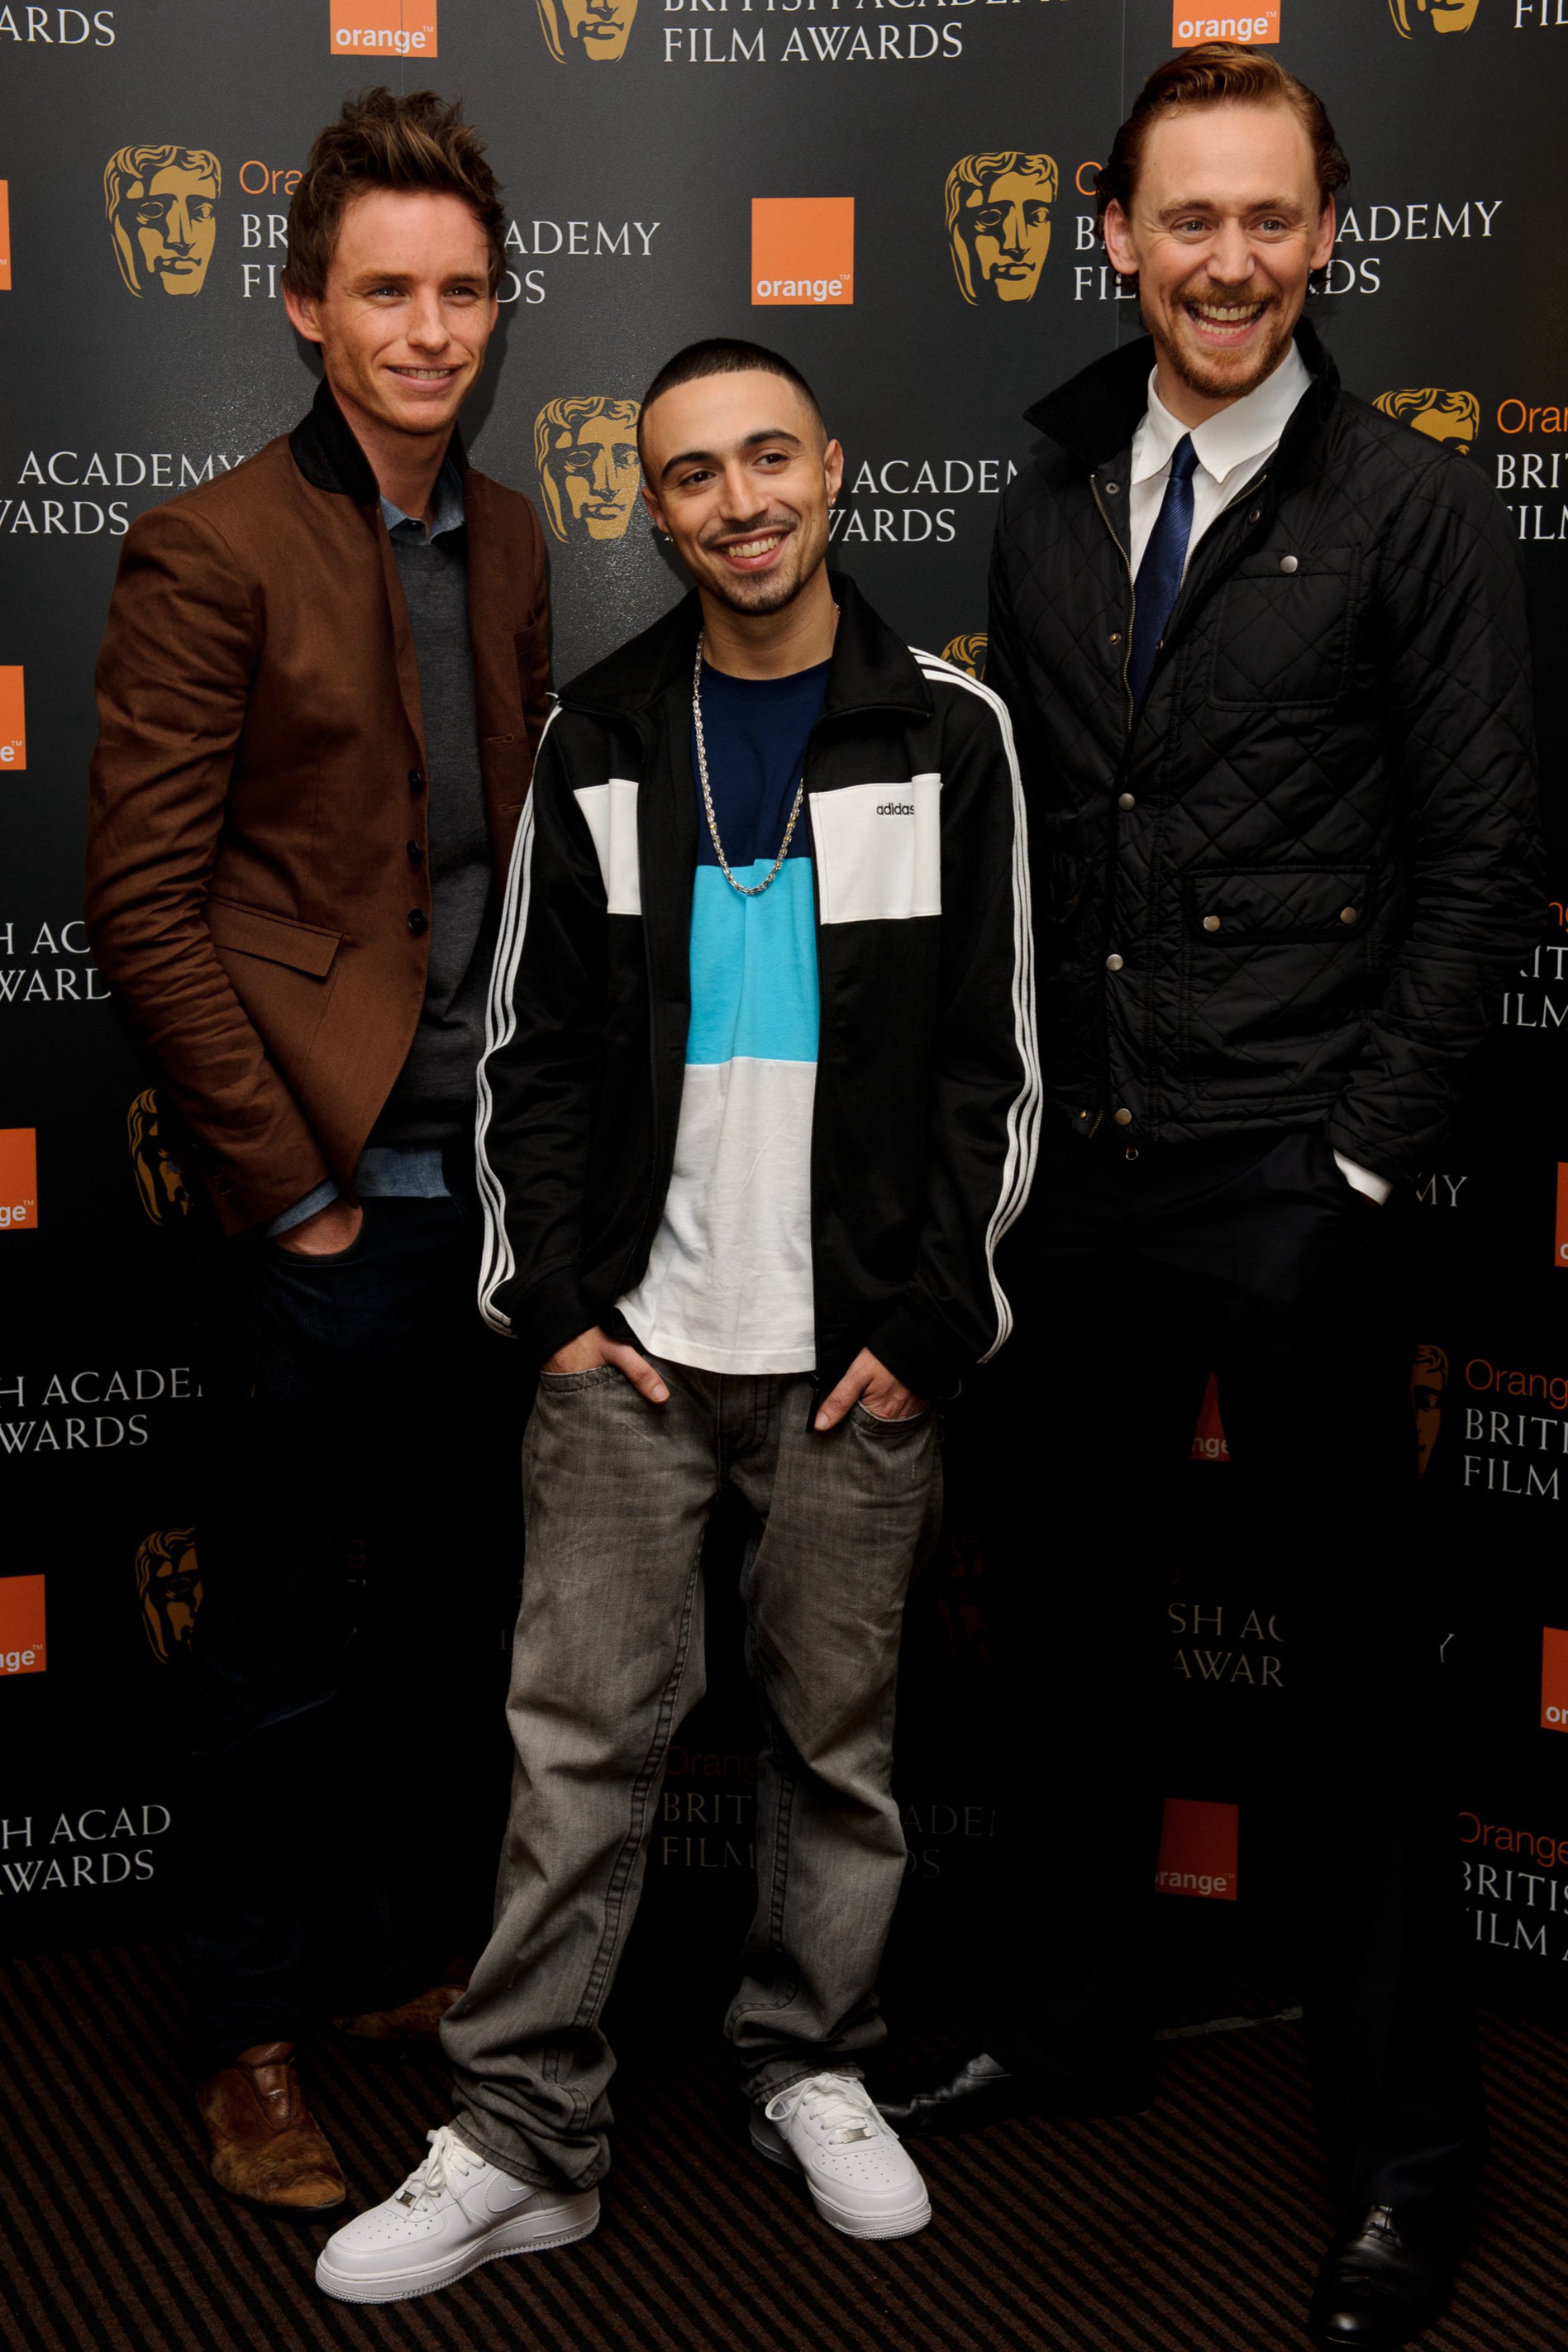 Rising star: Deacon with Eddie Redmayne and Tom Hiddleston at a Bafta event in 2012